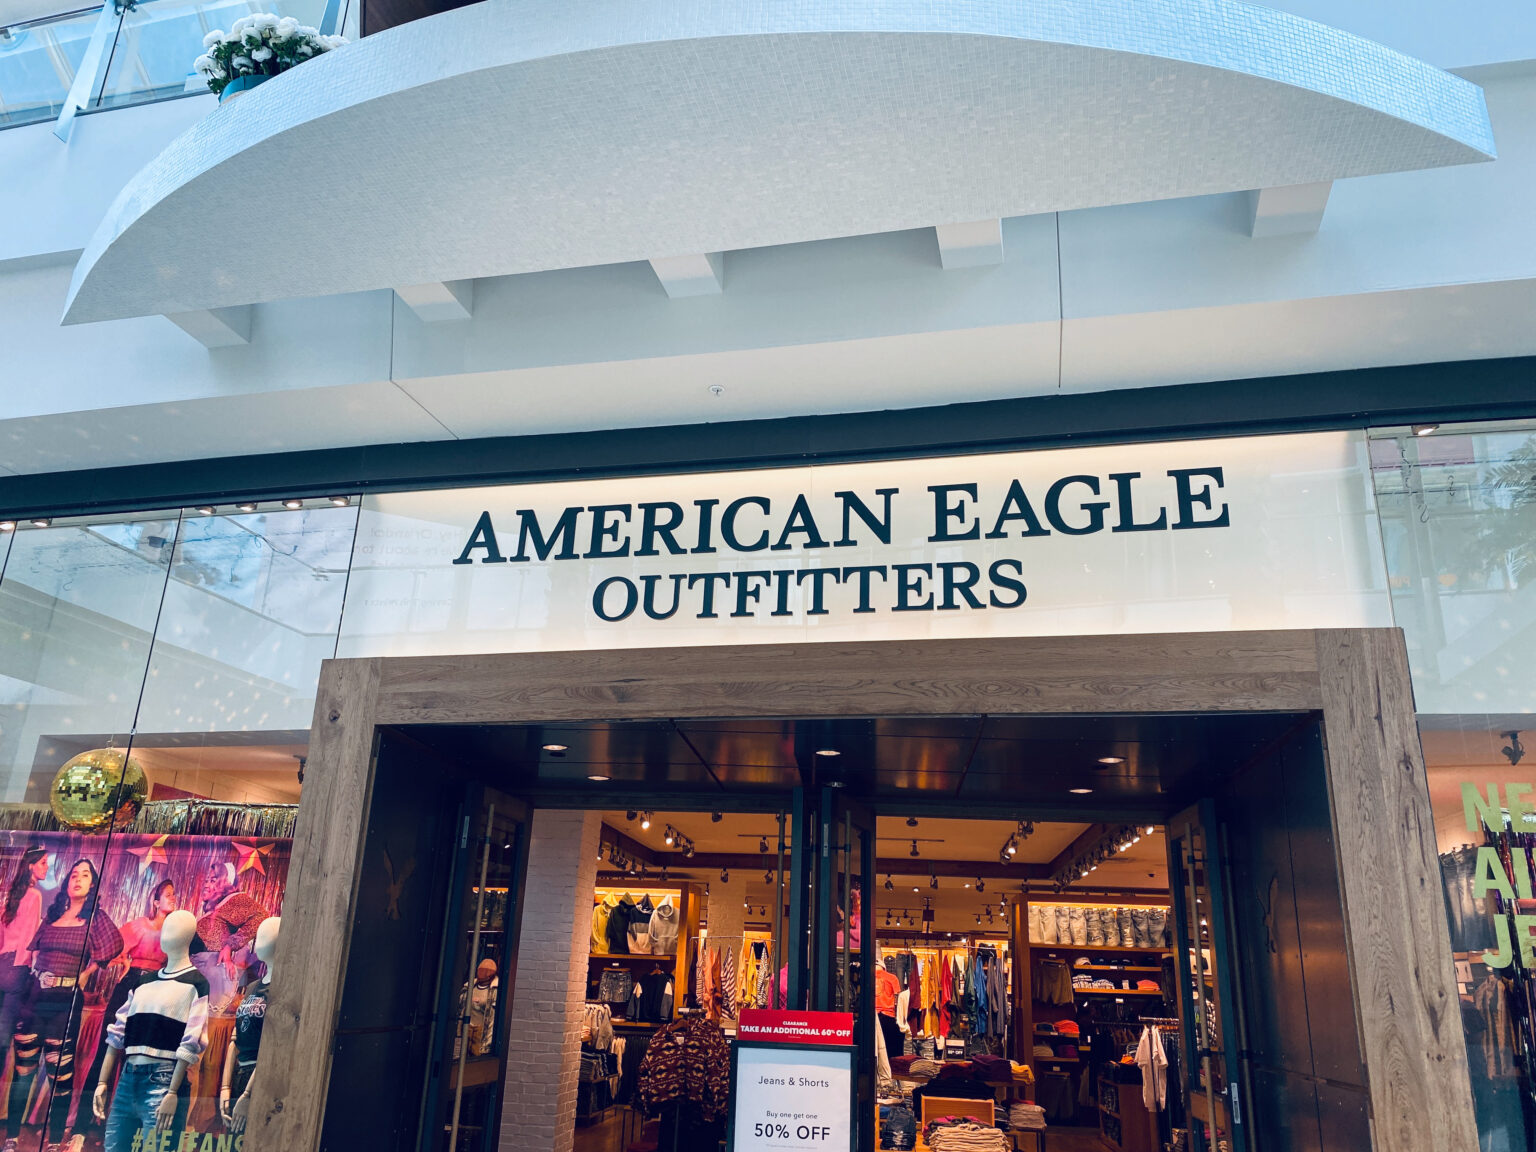 Exterior of an American Eagle store